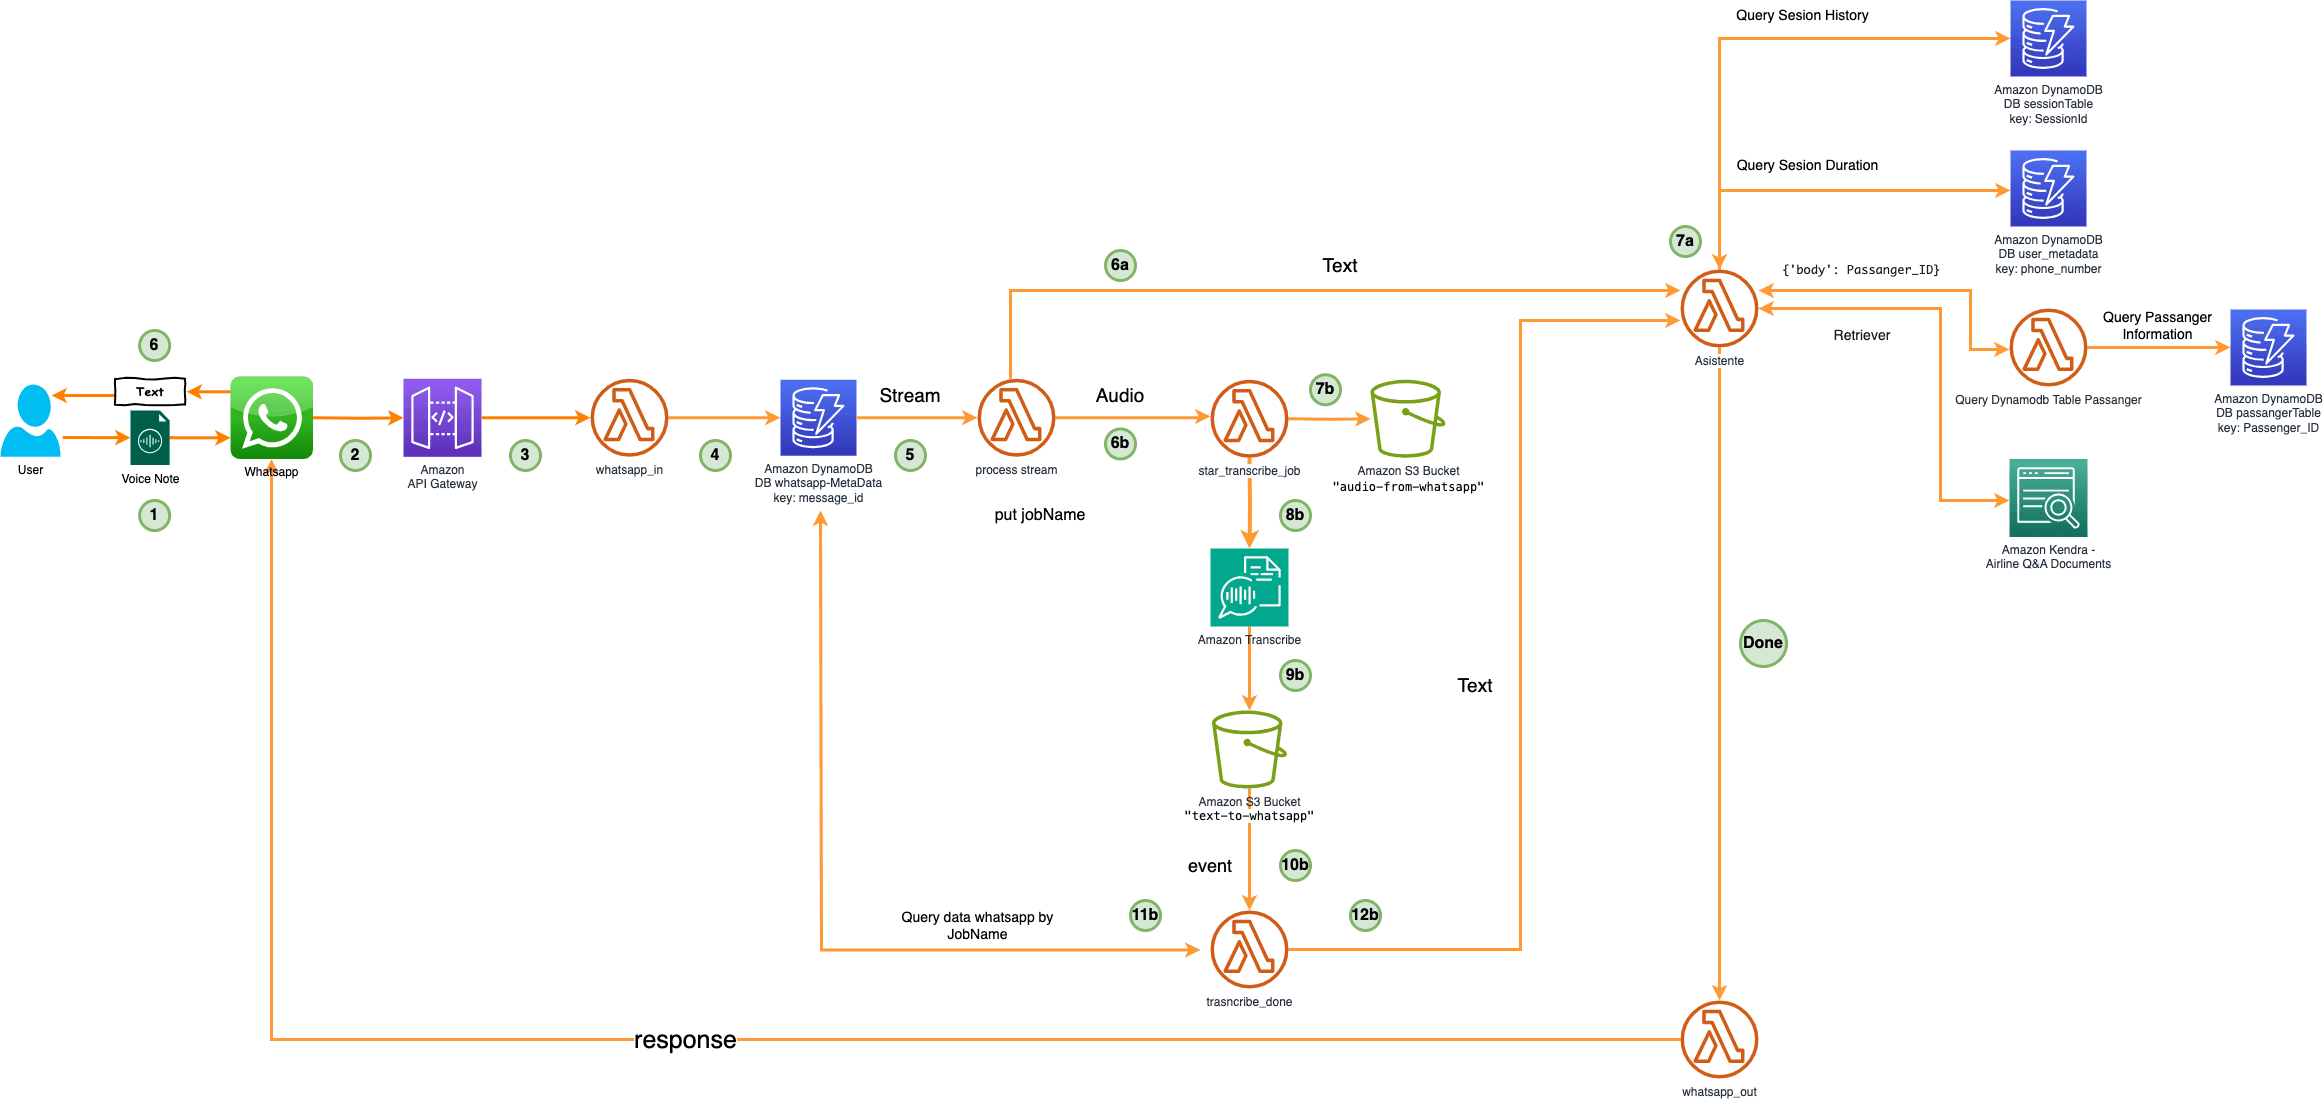 The Travel Assistant Diagram